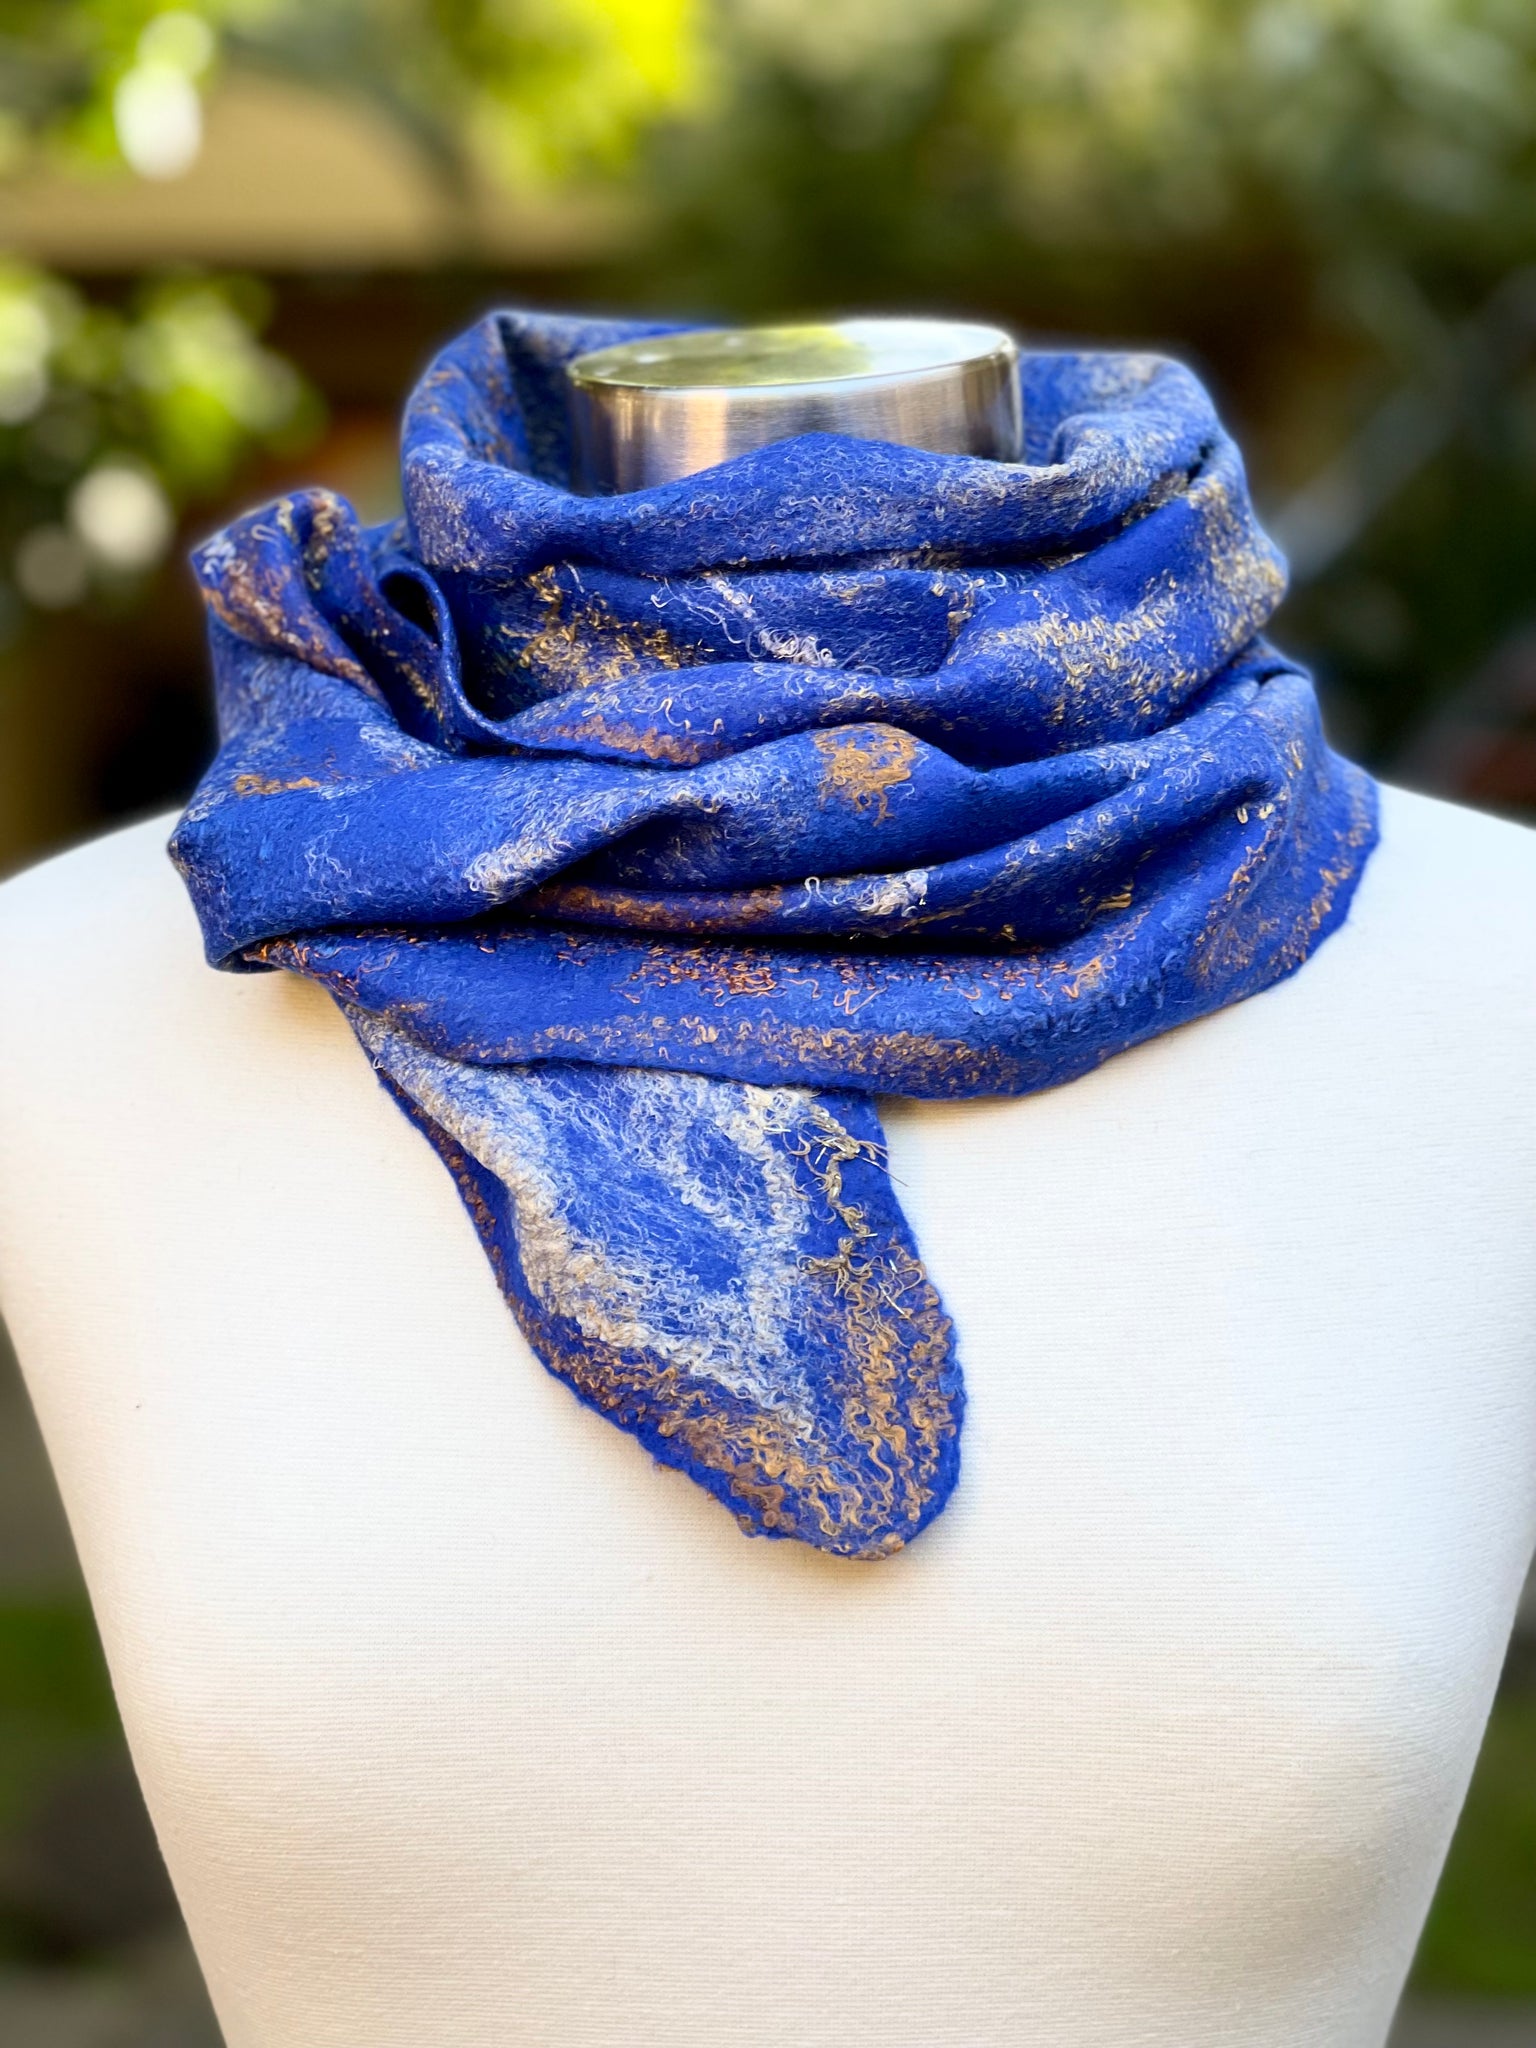 Blue scarf made in Morino Wool and Silk